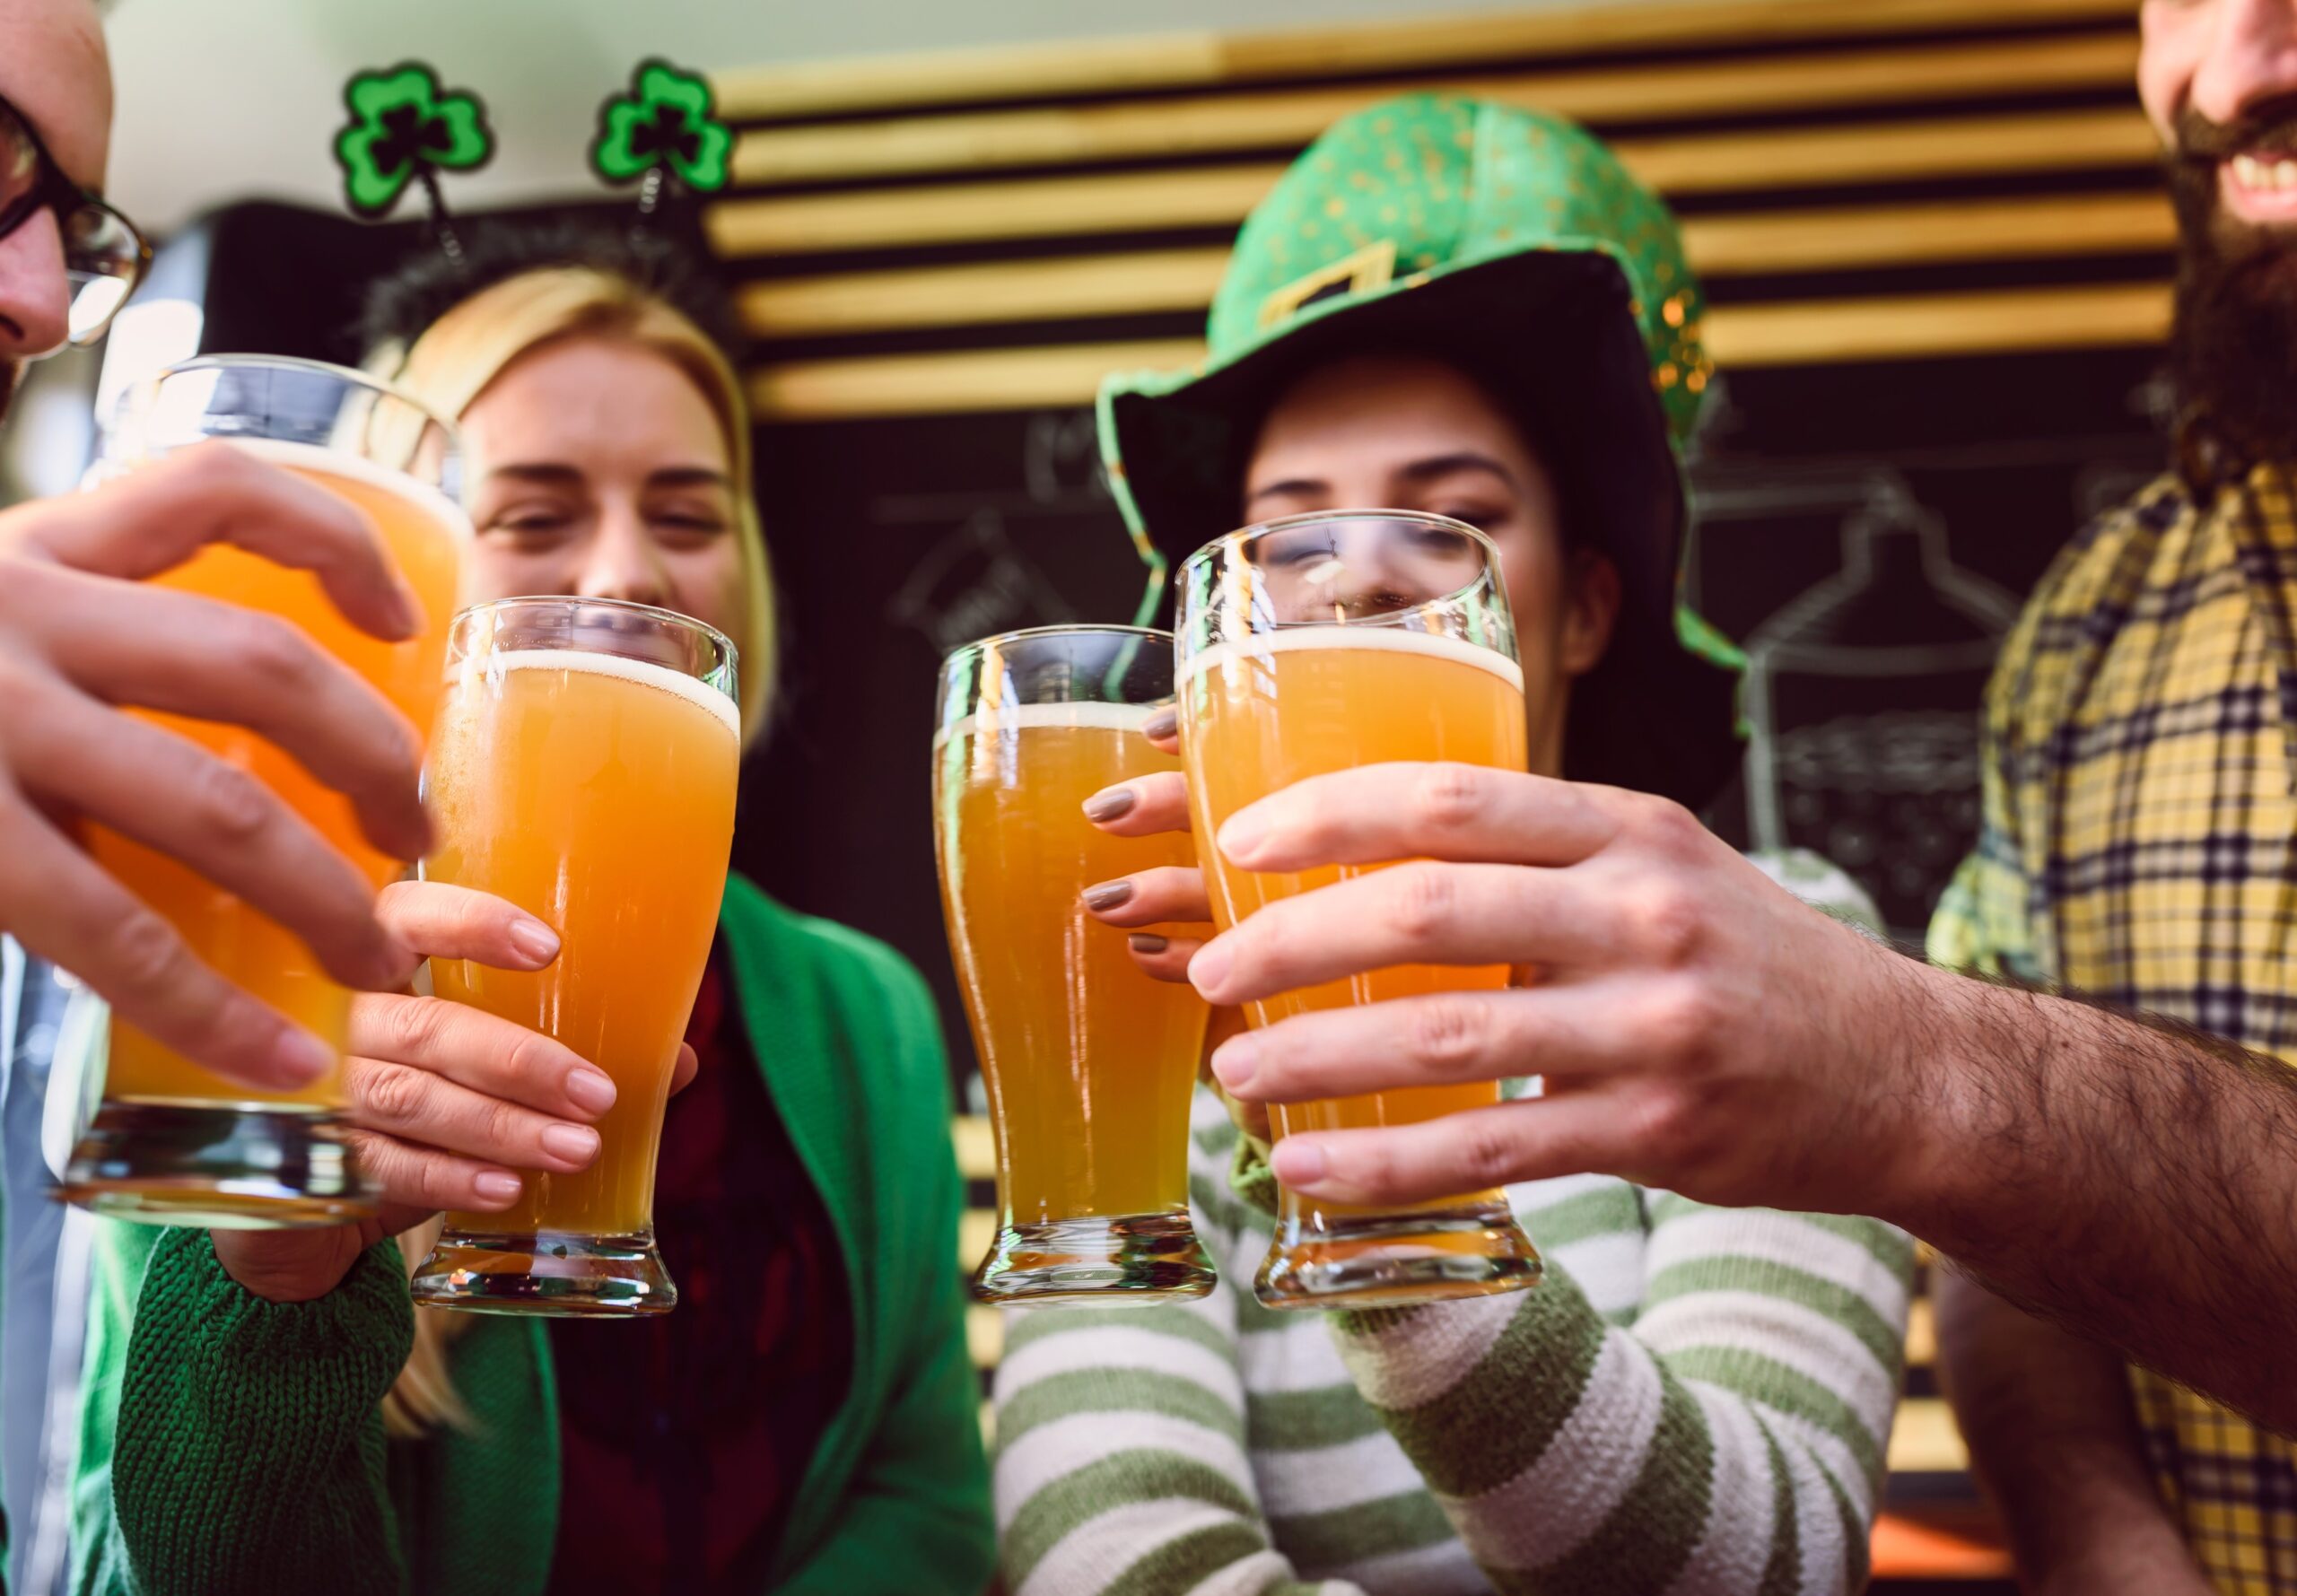 Friends drinking together on St. Patrick's Day